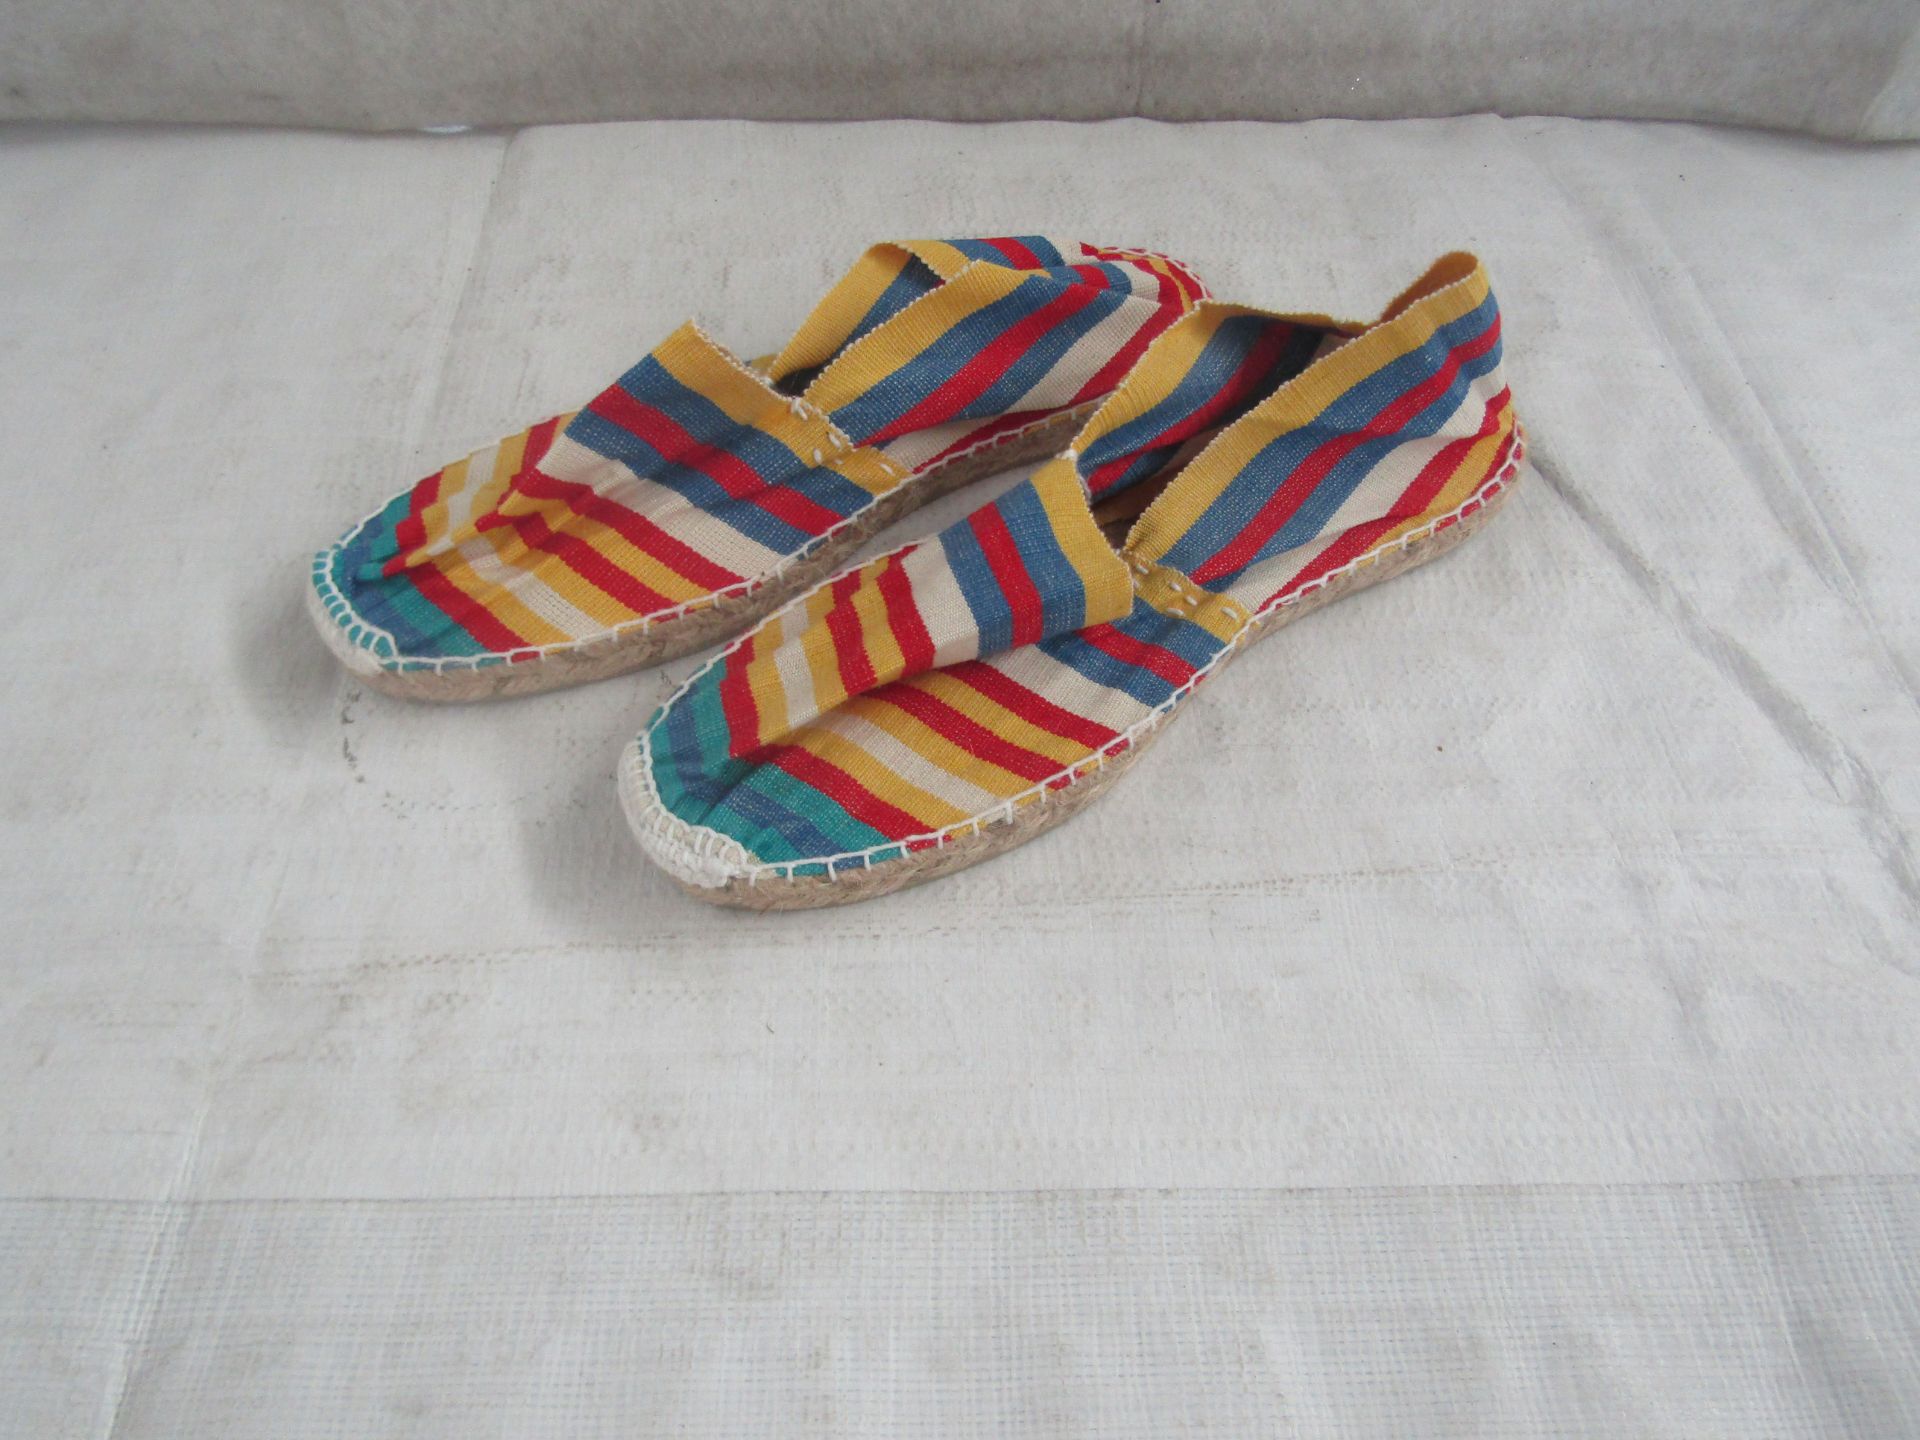 2X TheStripeCompany - Slip-On Espadrilles Shoes - See Image For Design - Size 41 - New.